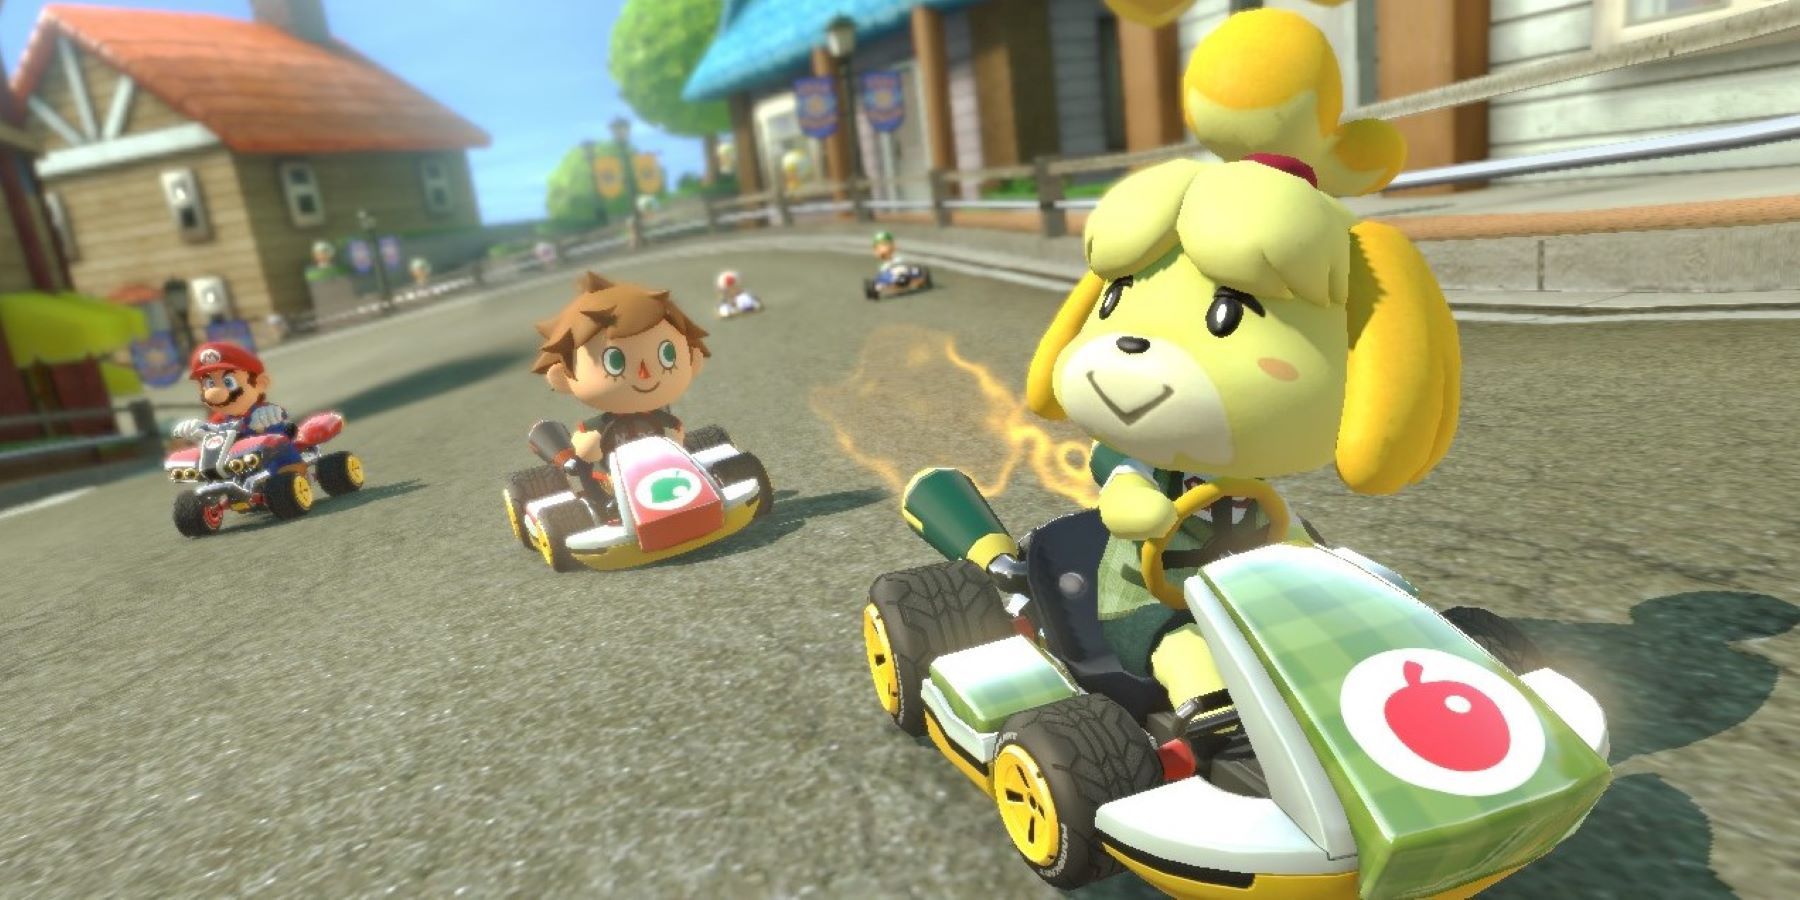 Mario Kart 8 Deluxe footage of Isabelle and the Villager from Animal Crossing racing karts with Mario